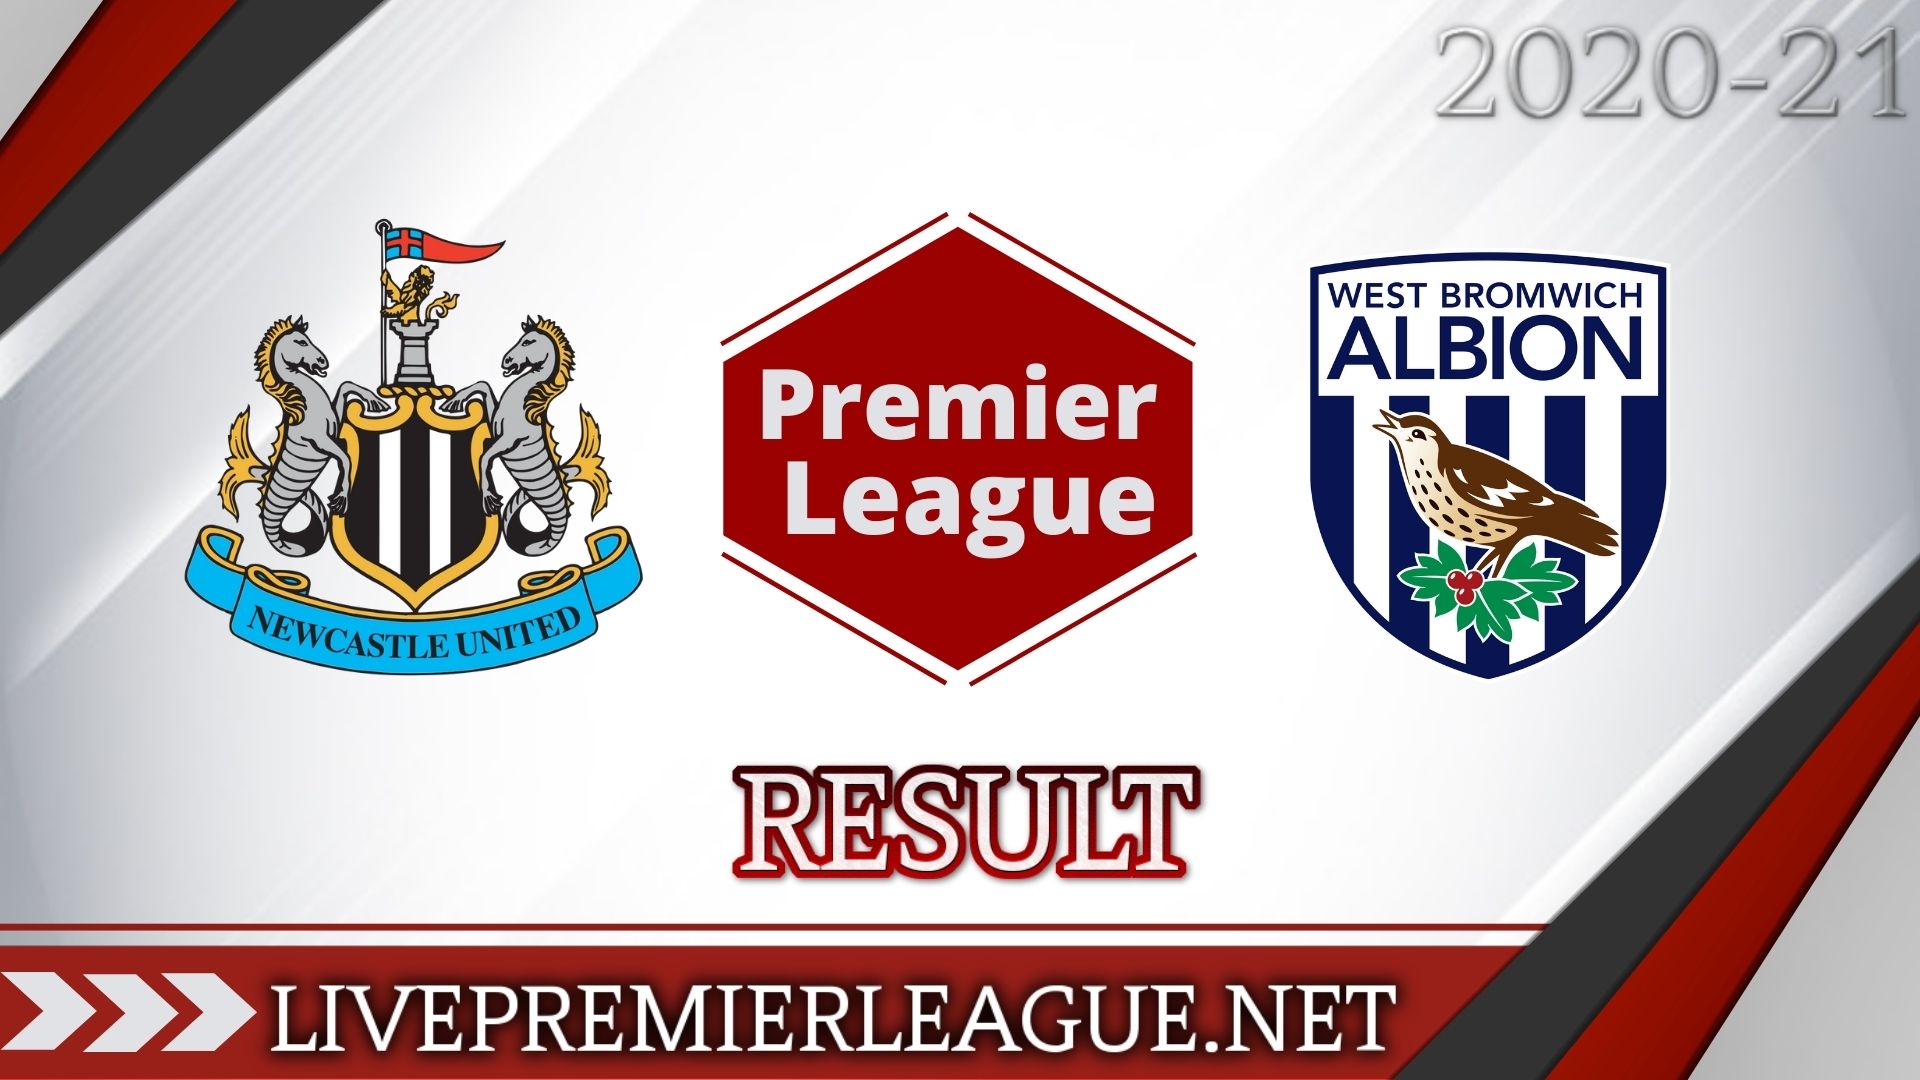 Newcastle United Vs West Bromwich Albion | Week 12 Result 2020